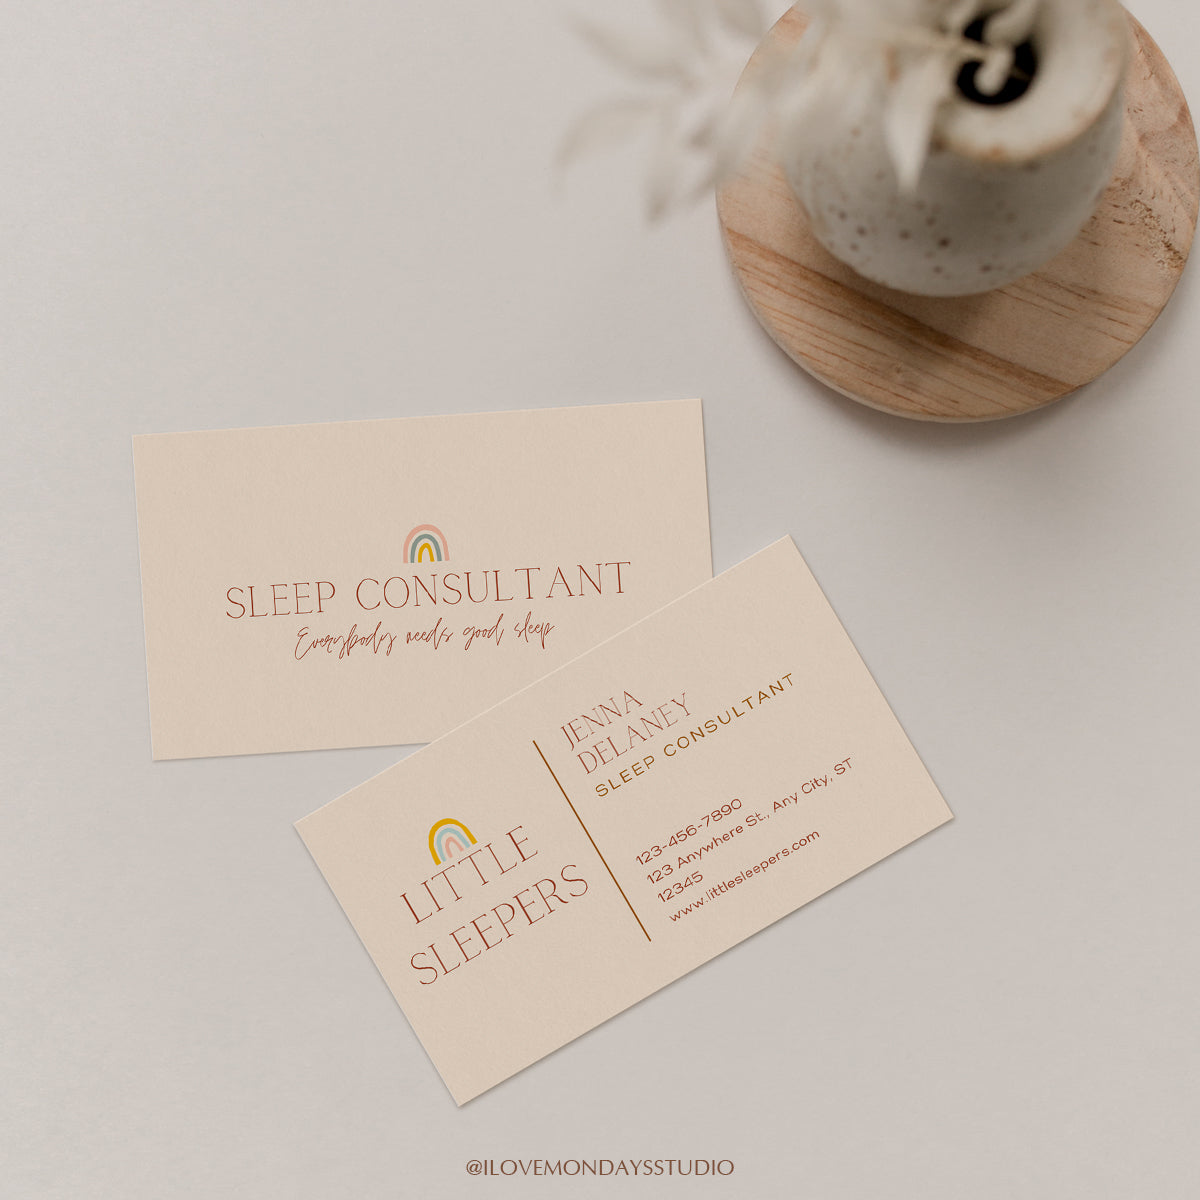 business card template canva